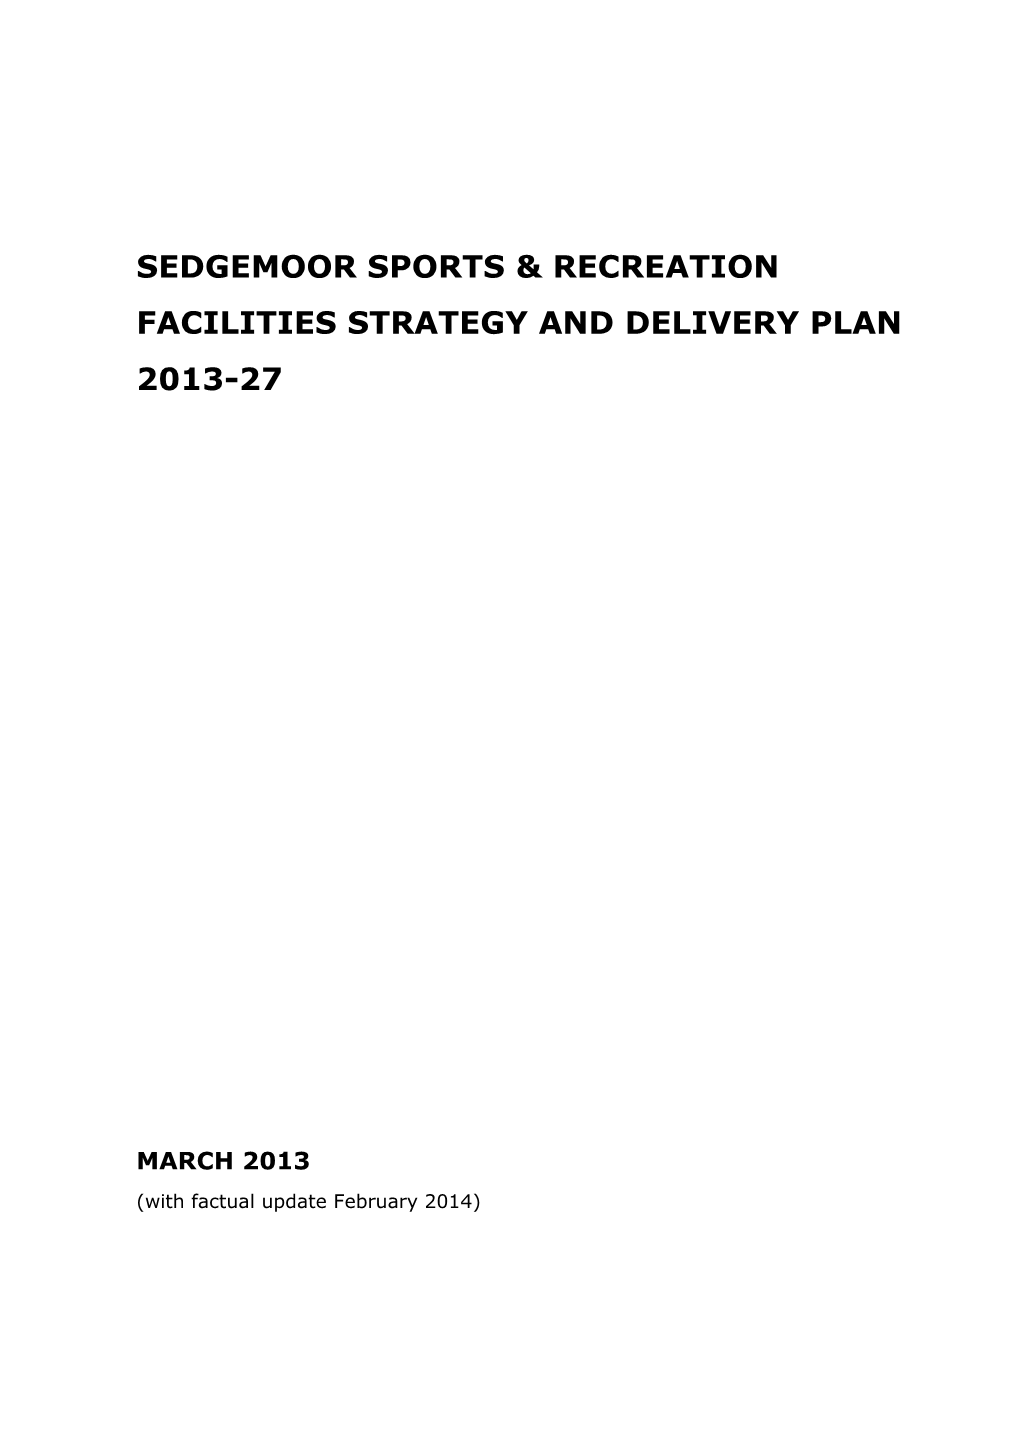 Sedgemoor Sports & Recreation Facilities Strategy and Delivery Plan 2013-27